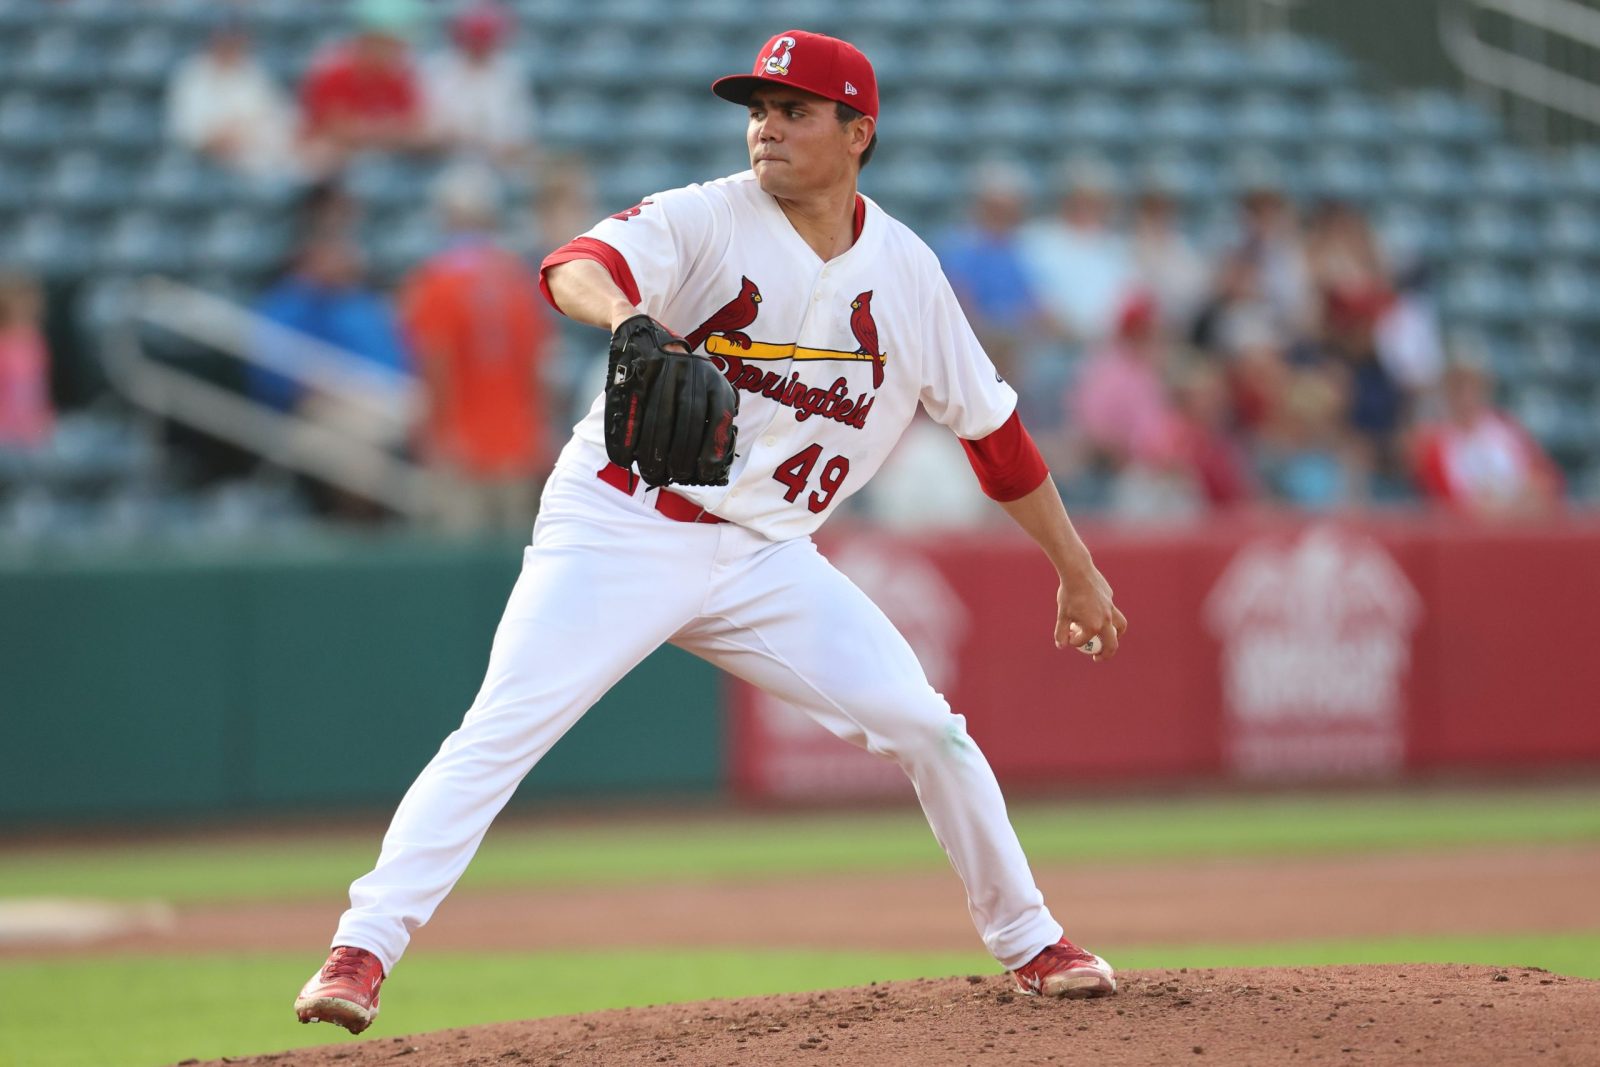 Alex Cornwell, wearing a Springfield Cardinals uniform, pitches the baseball during a game